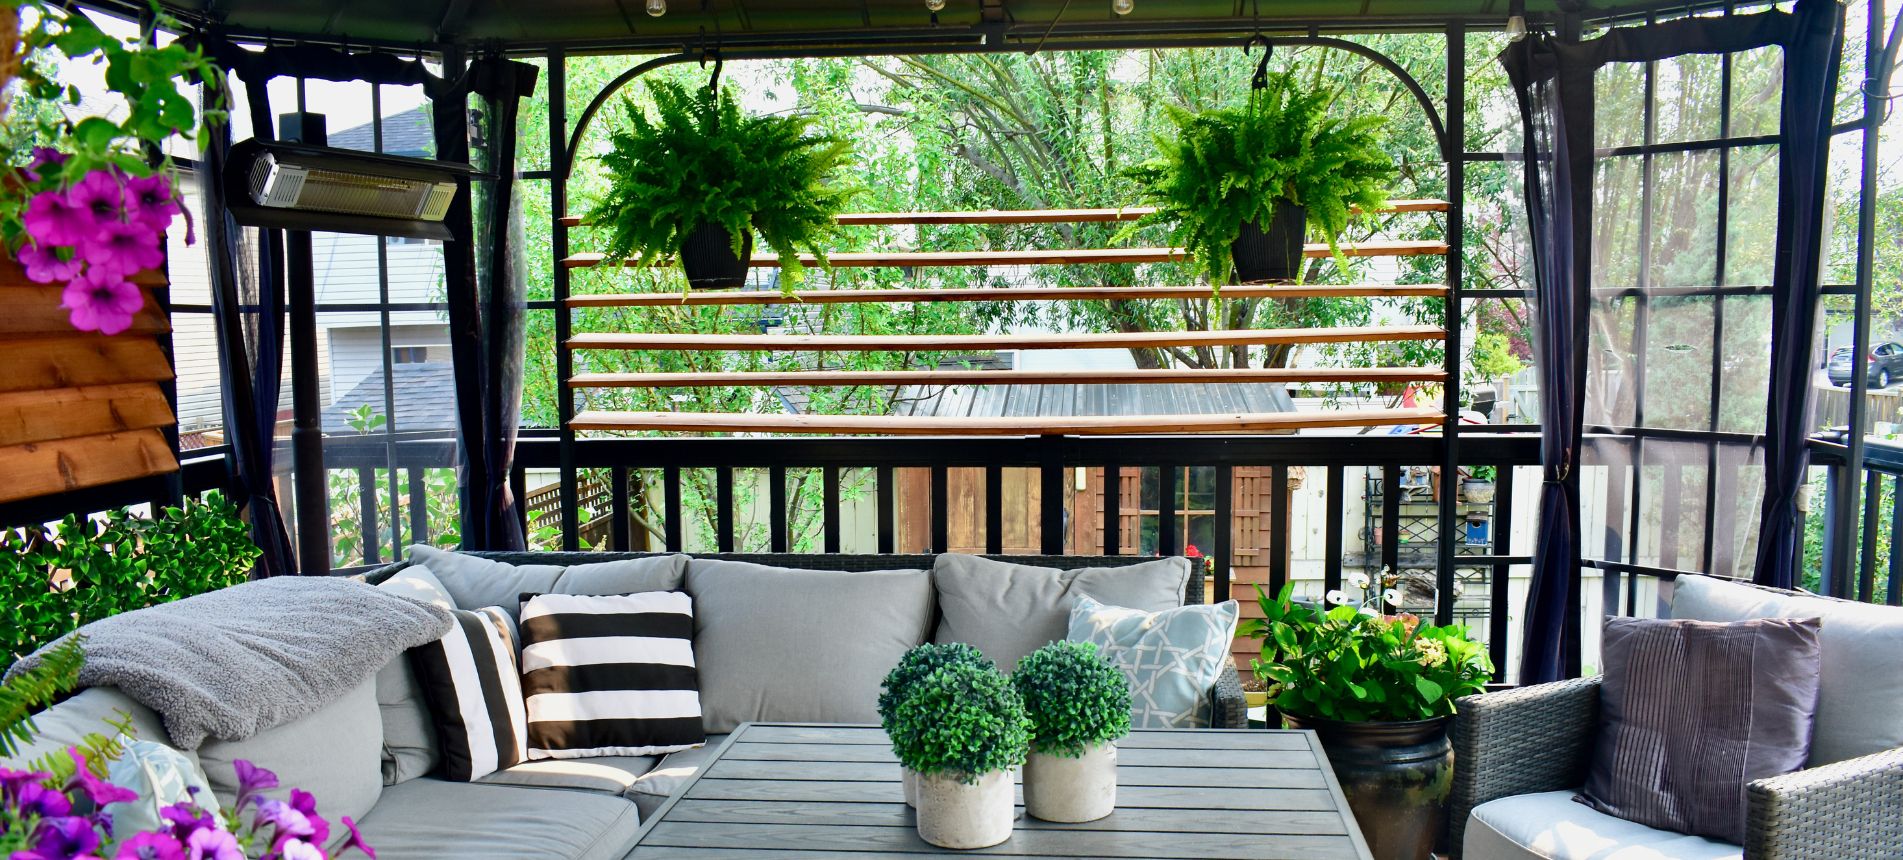 Ways To Create a Cool, Comfortable Backyard Oasis for Summer